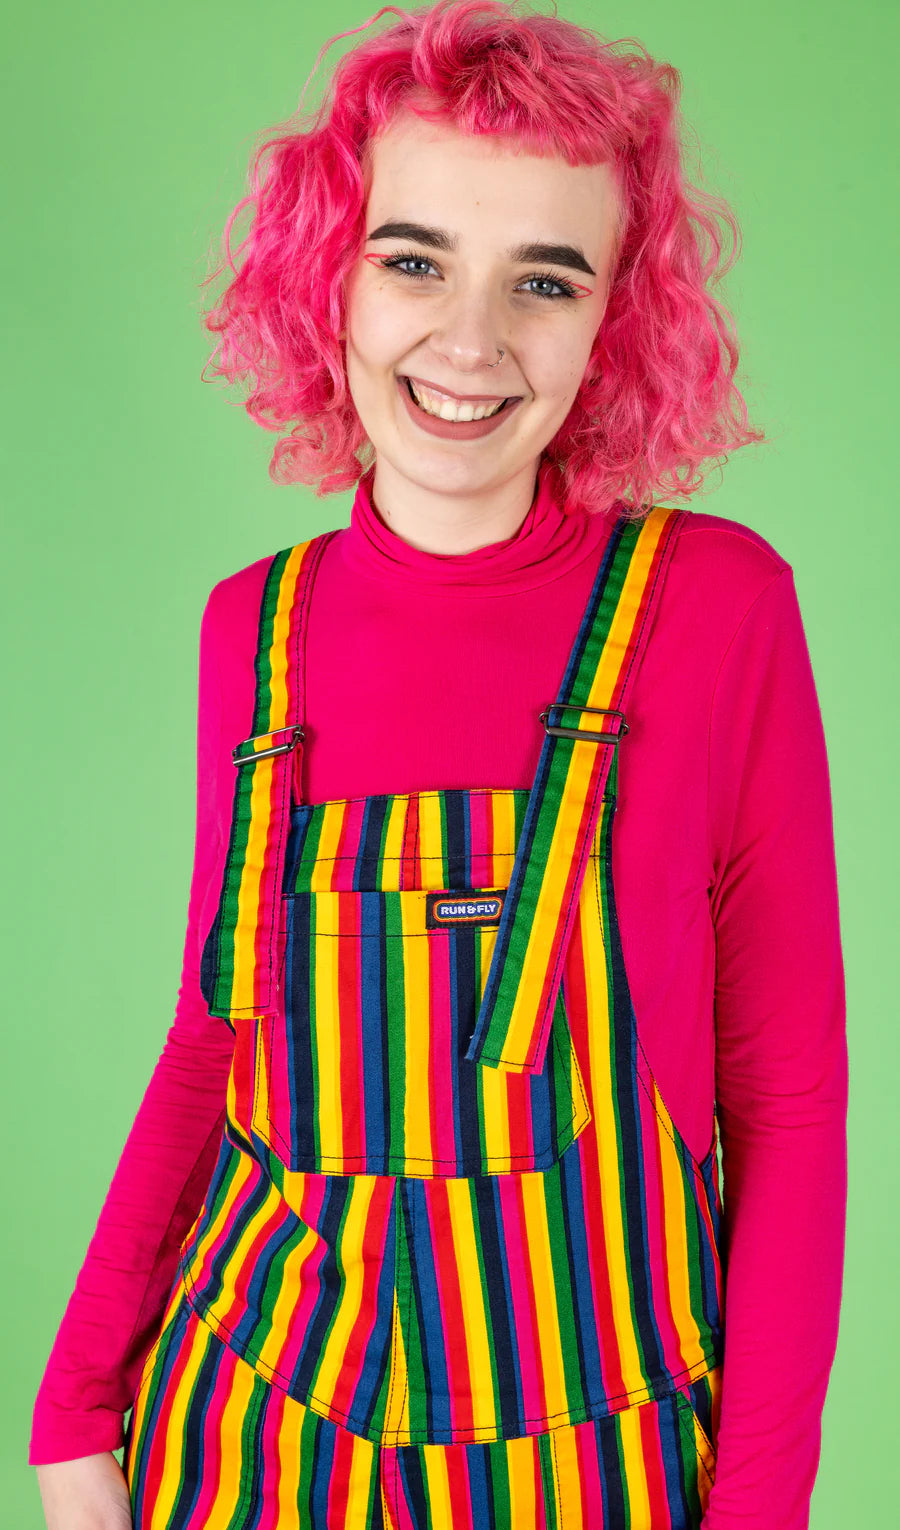 Run & Fly - Rainbow Stripes Stretch Twill Dungarees